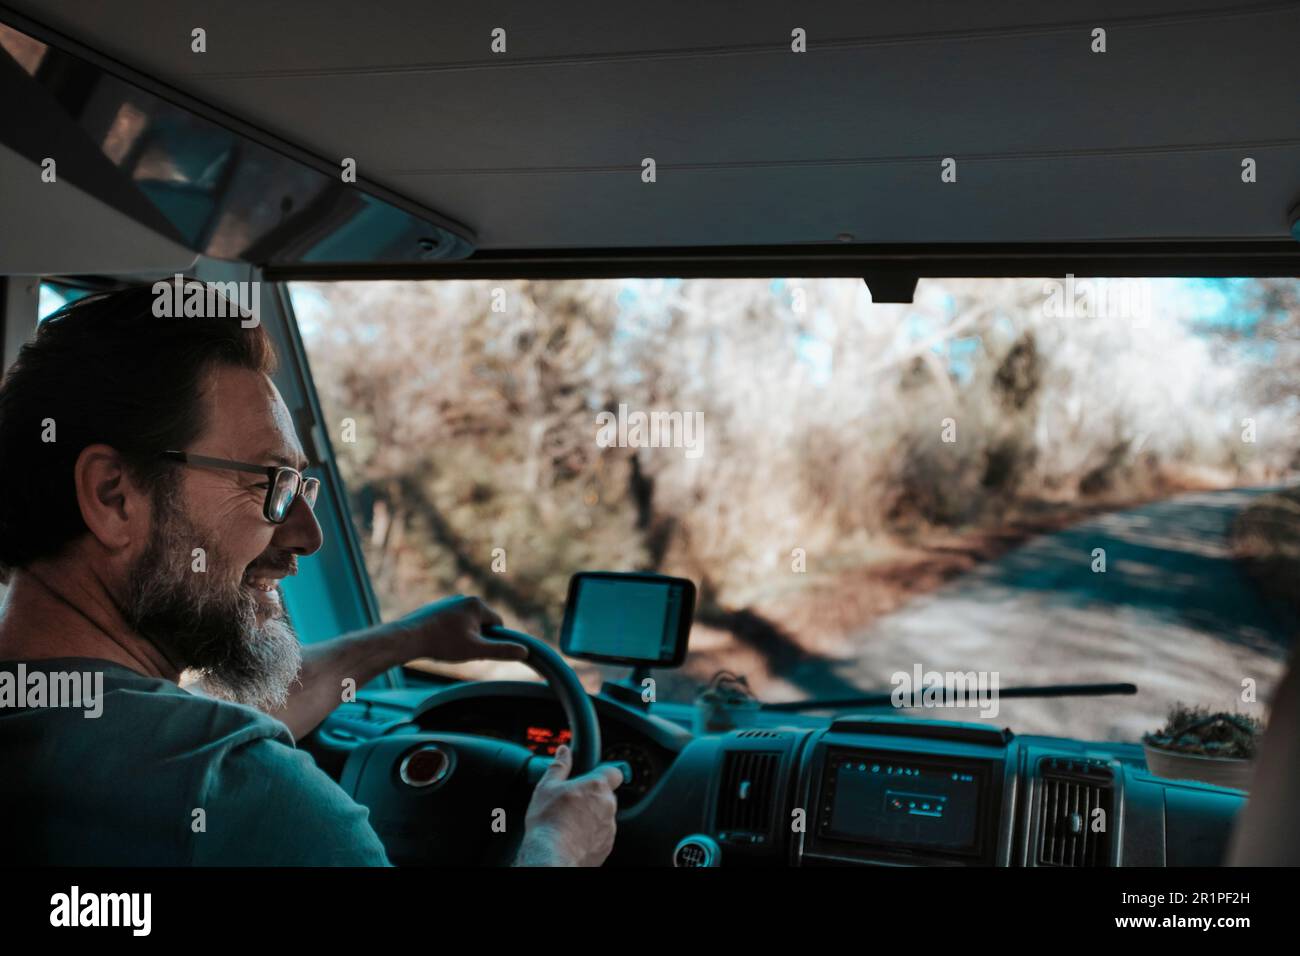 Happy man with beard smile and drive camper van, gps navigation system. Looking passenger and enjoying travel. Motor home caravan vacation holiday adventure concept lifestyle vanlife Stock Photo